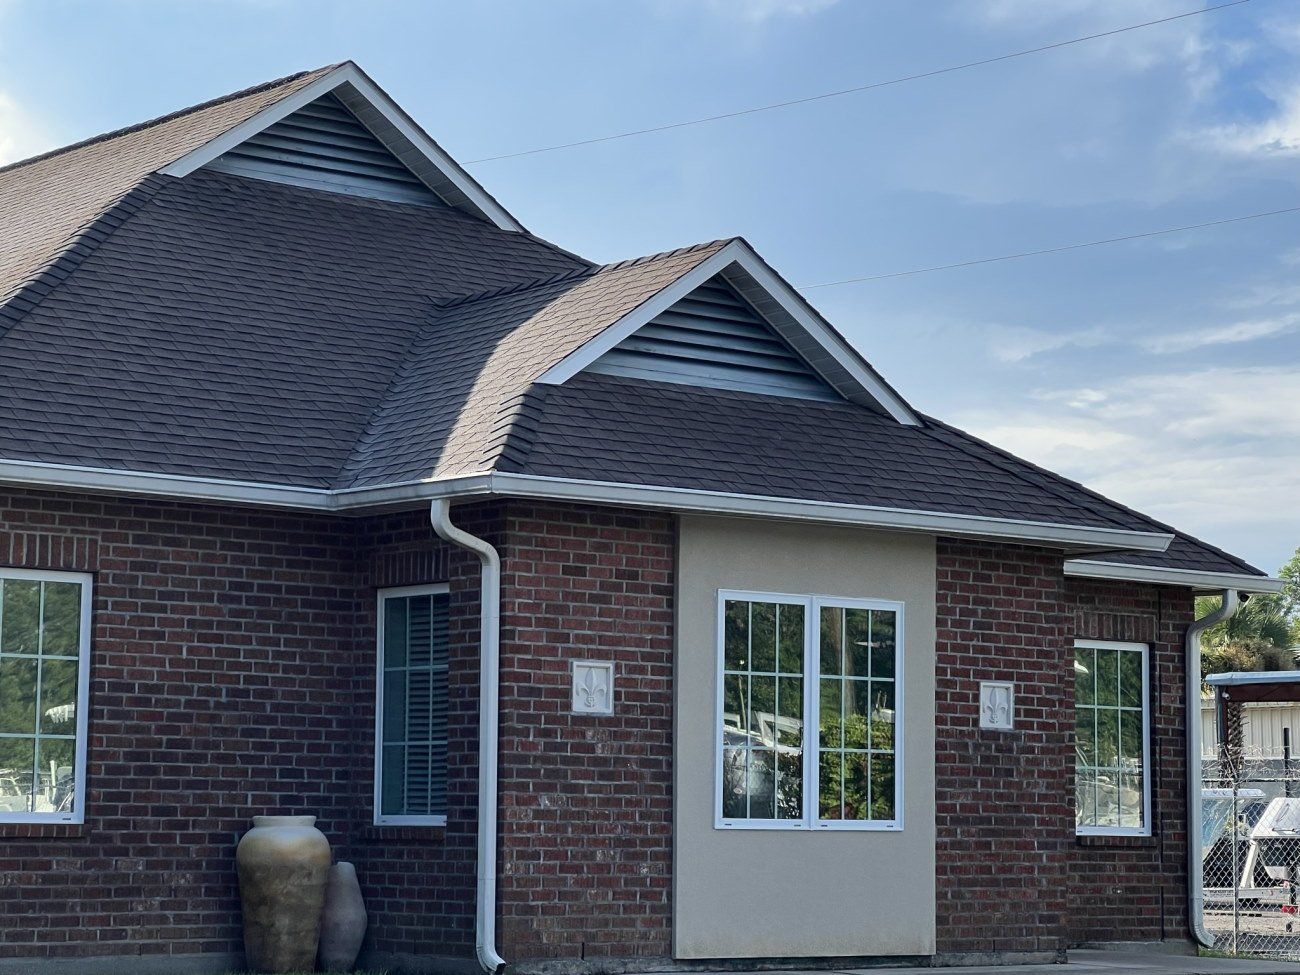 What is a Fortified Roof and How Can It Protect Your Home?